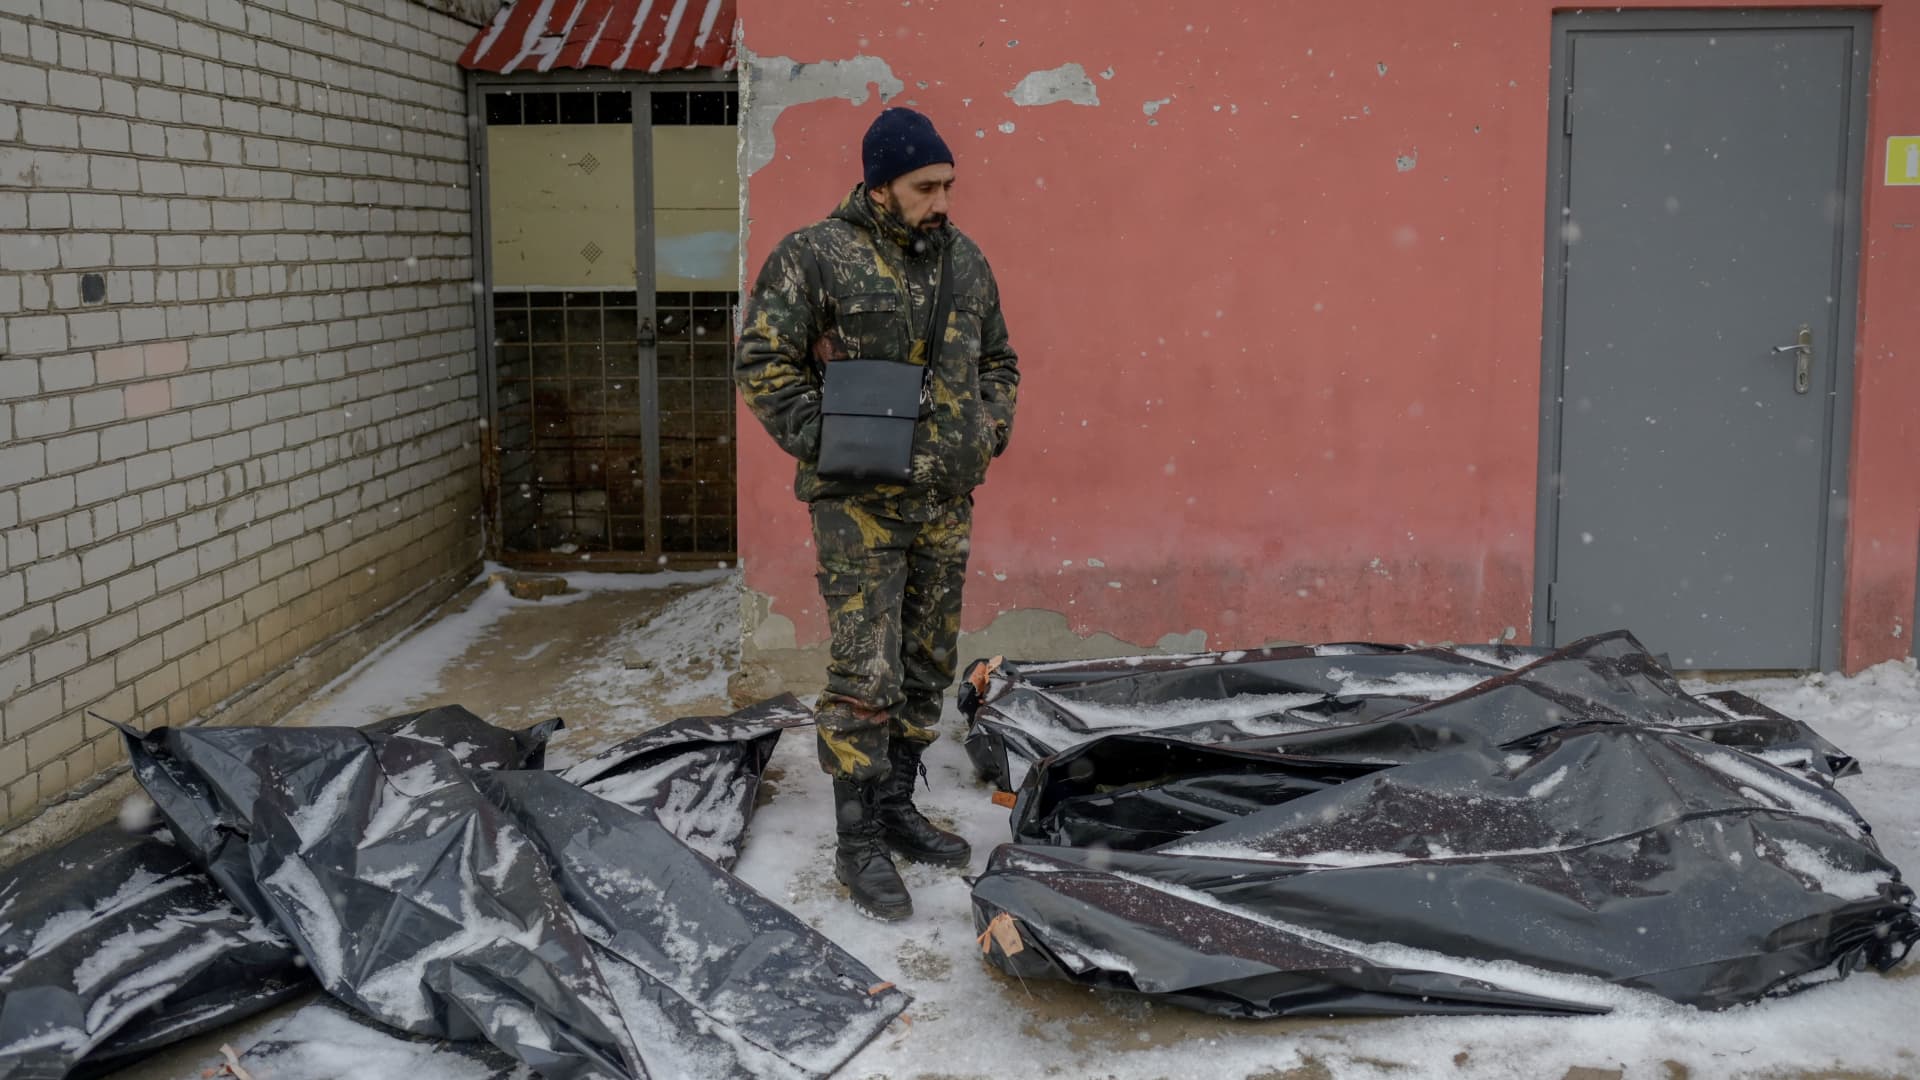 A Ukrainian man in camouflage stands next to snow covered body bags in the yard of a morgue in Mykolaiv, a city on the shores of the Black Sea that has been under Russian attack for days on March 11, 2022.